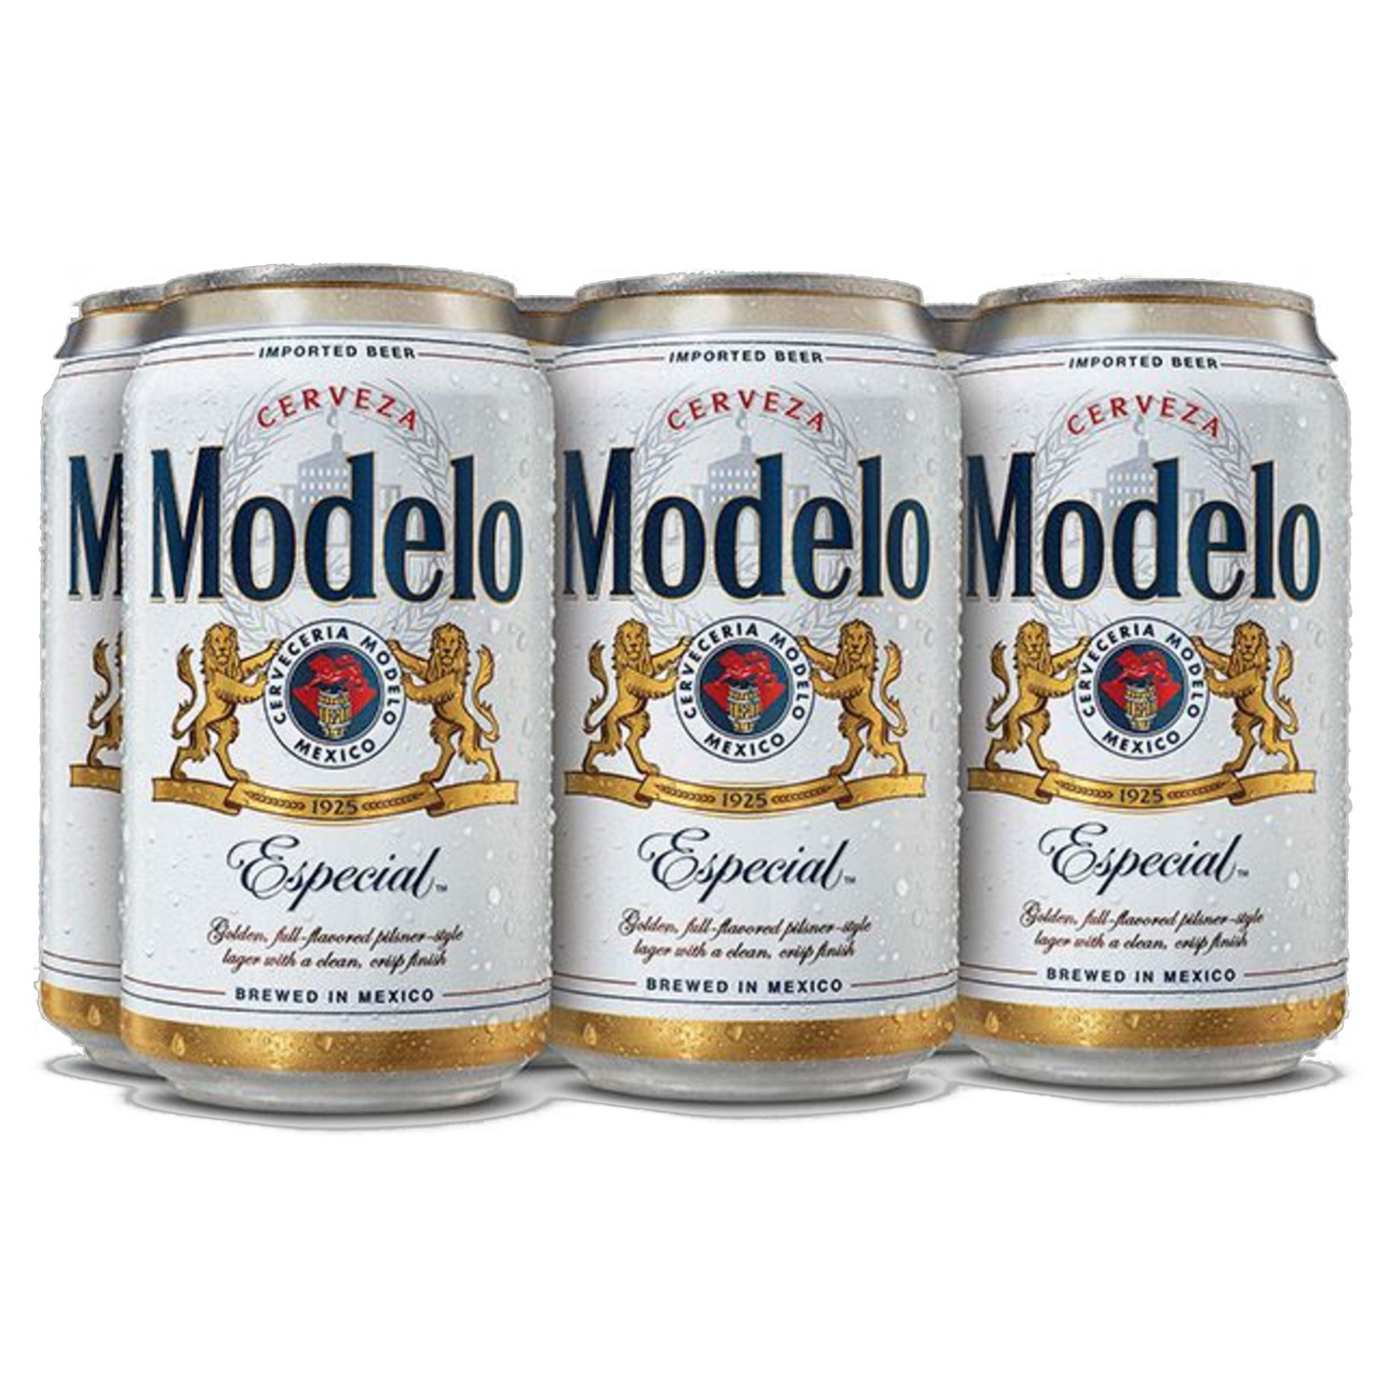 Modelo Especial Mexican Lager Import Beer 12 oz Cans, 6 pk; image 1 of 5